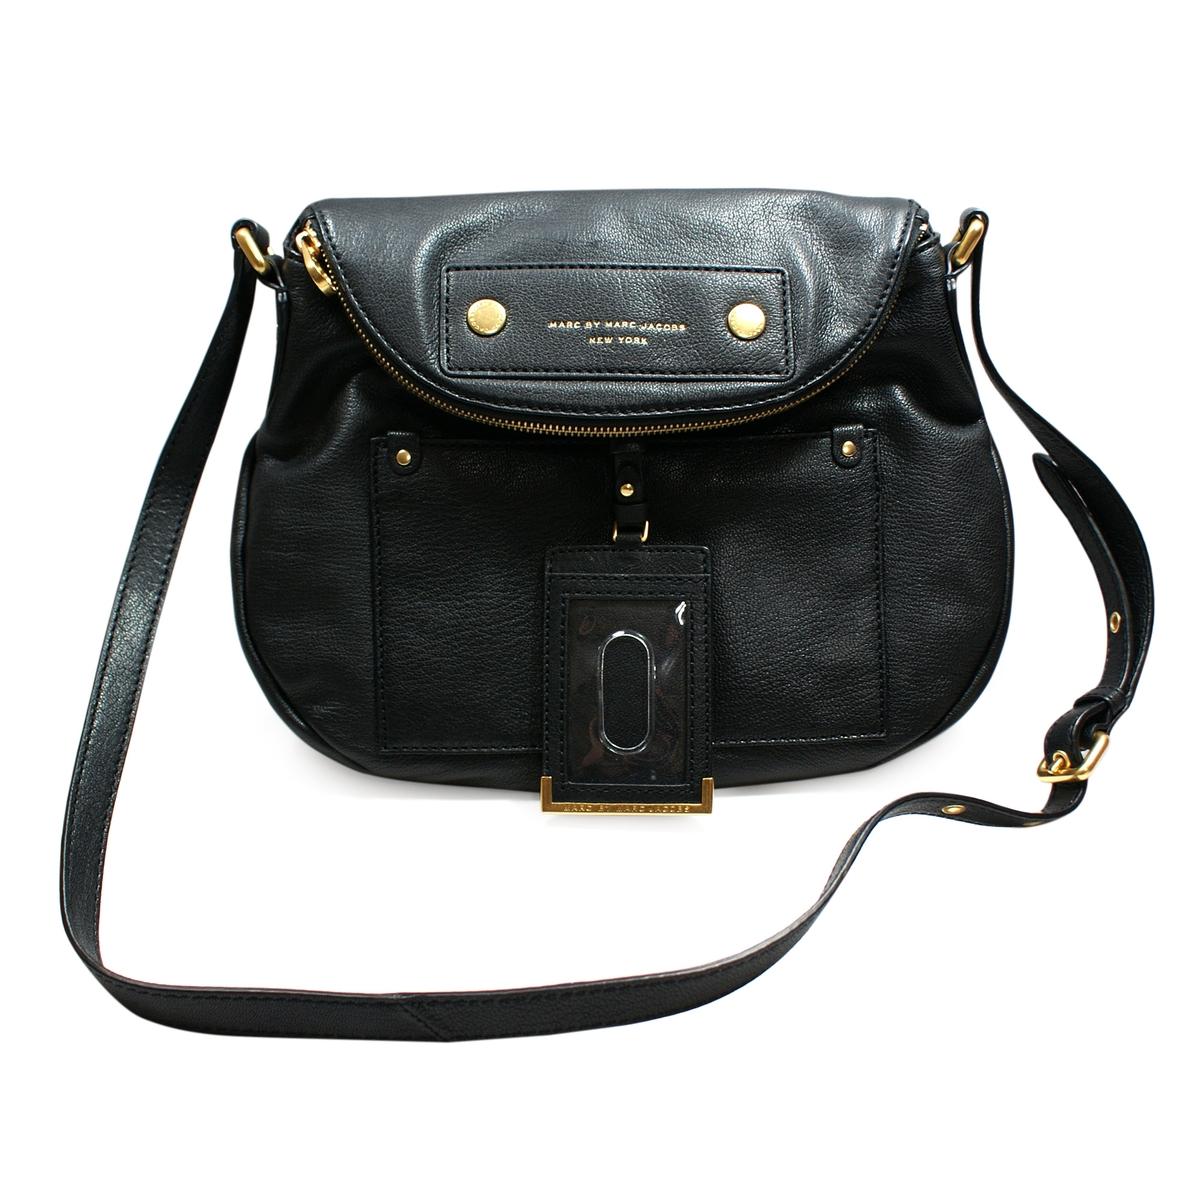 Marc By Marc Jacobs Black Leather Swing/ Cross Body Bag #M3122251 | Marc By Marc Jacobs M3122251